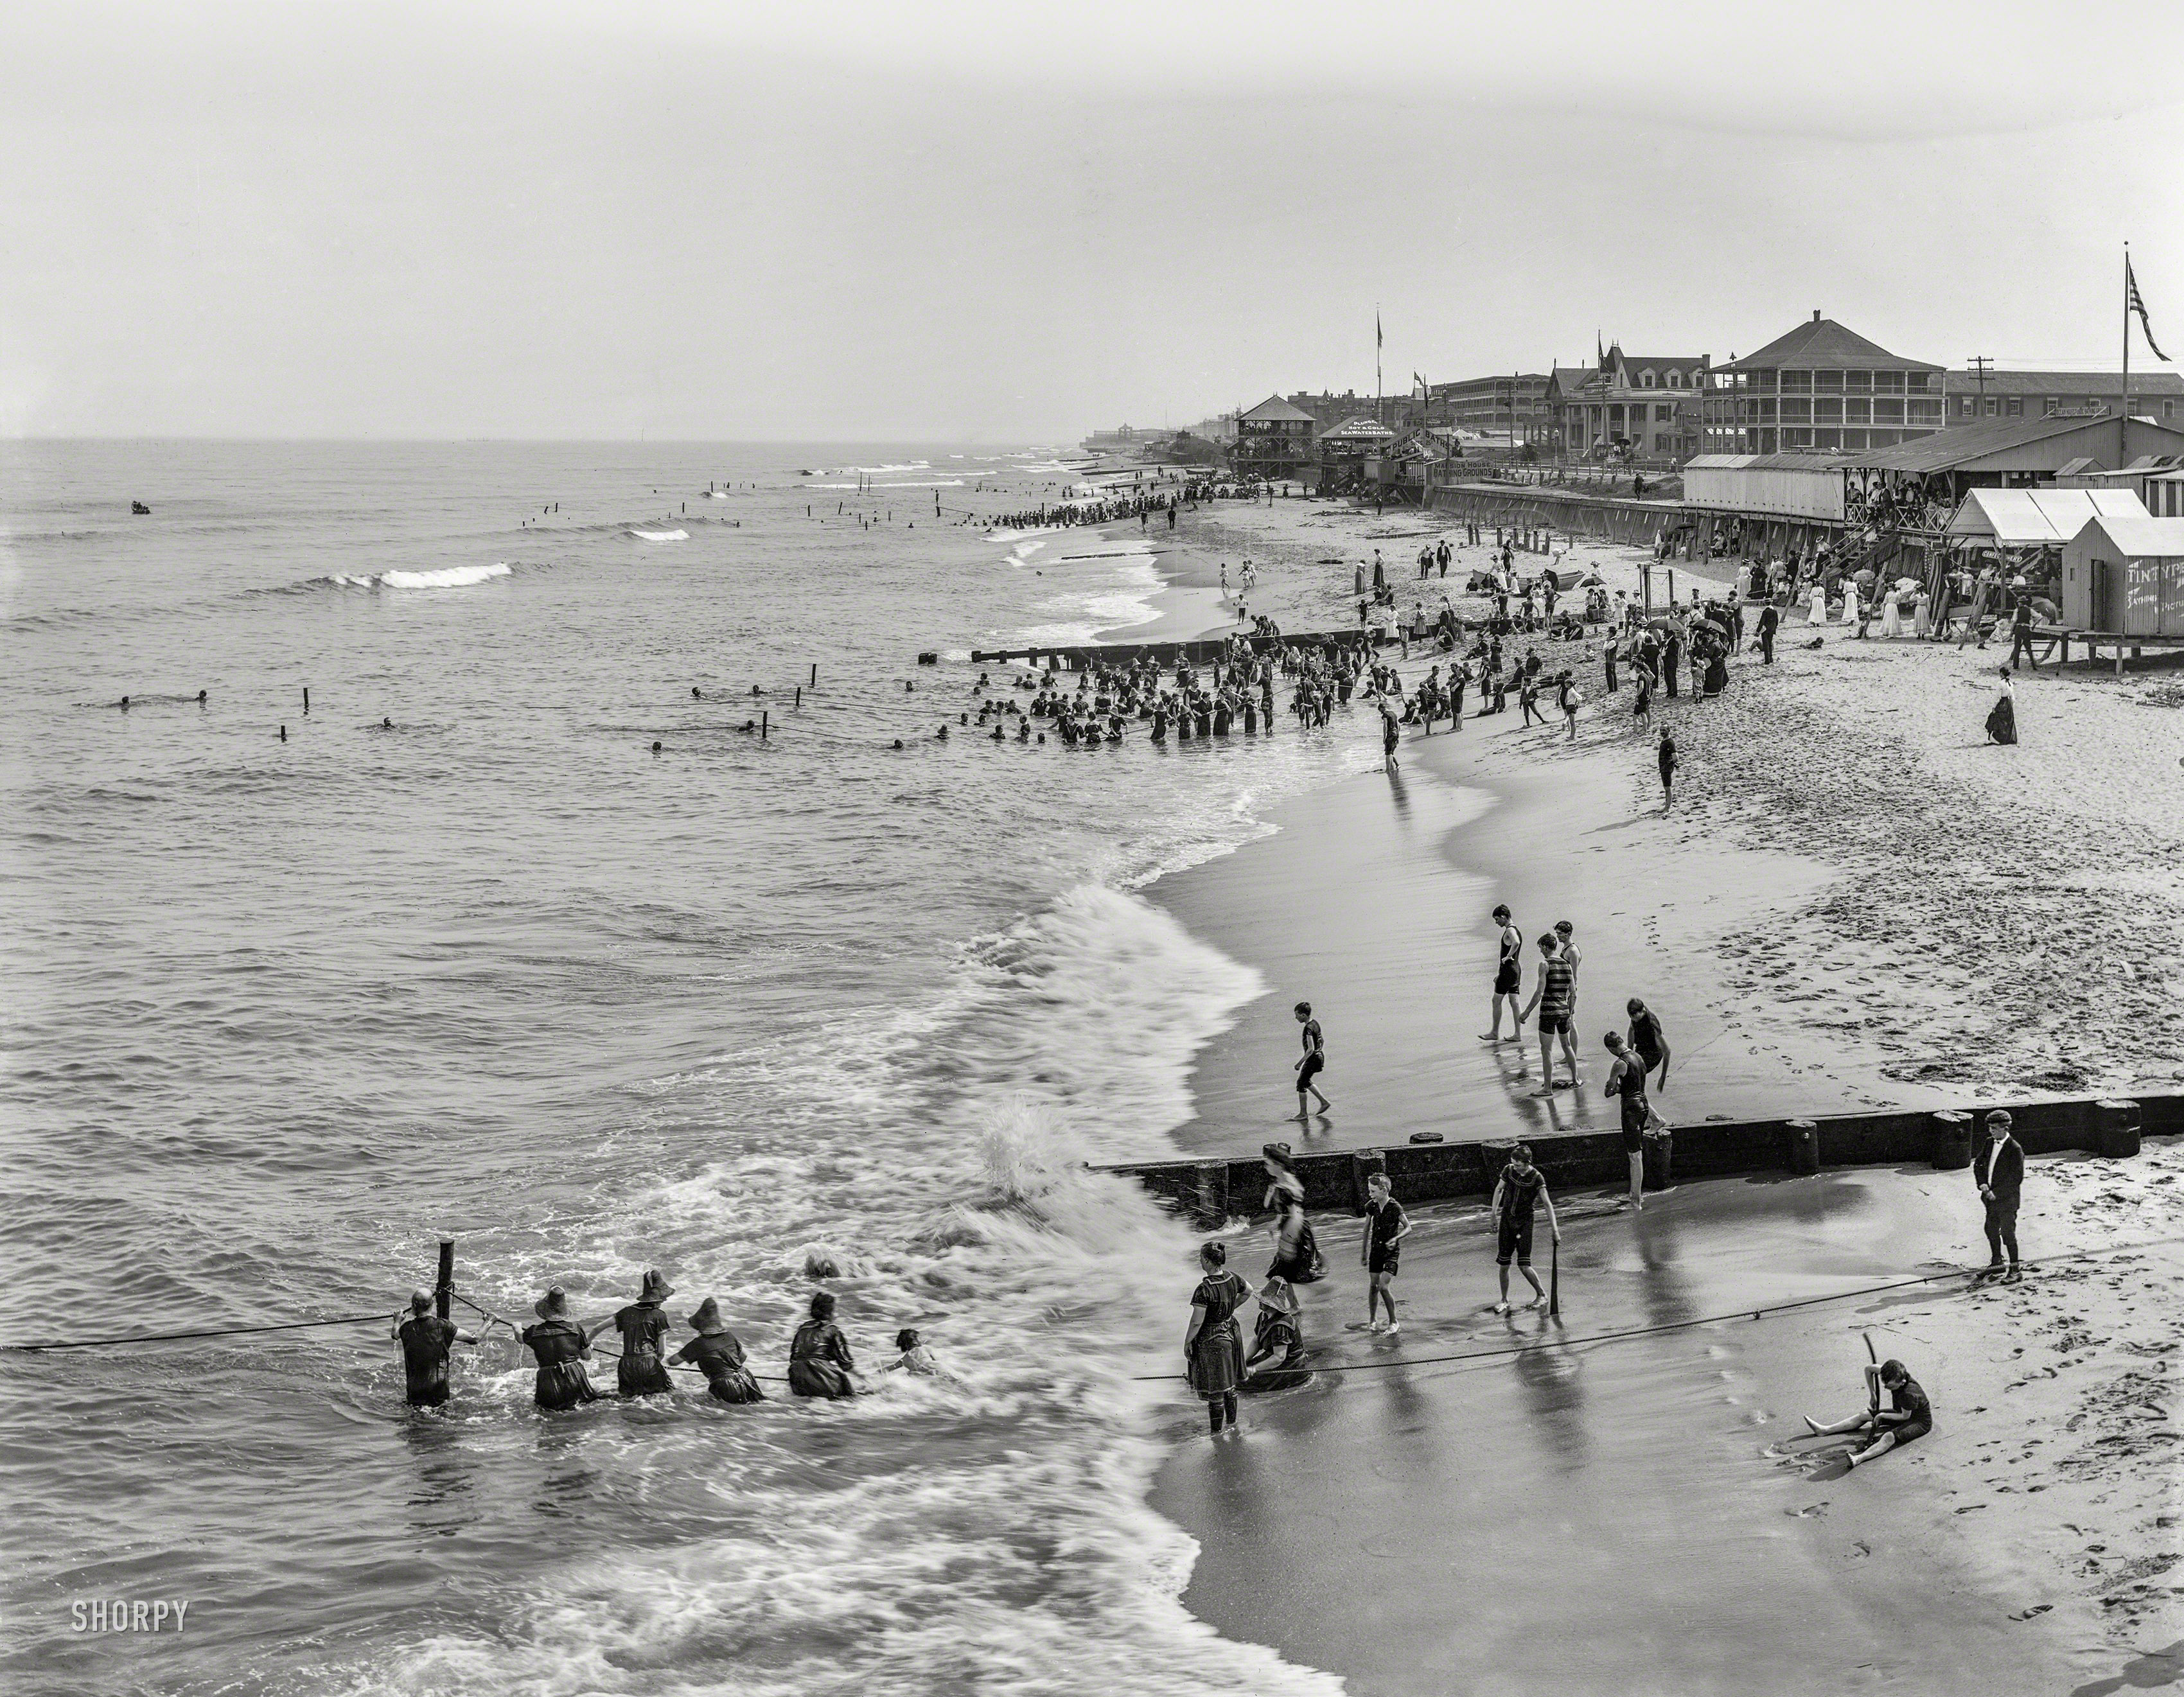 The Jersey Shore circa 1900. "The beach at Long Branch." 8x10 inch dry plate glass negative, Detroit Publishing Company. View full size.